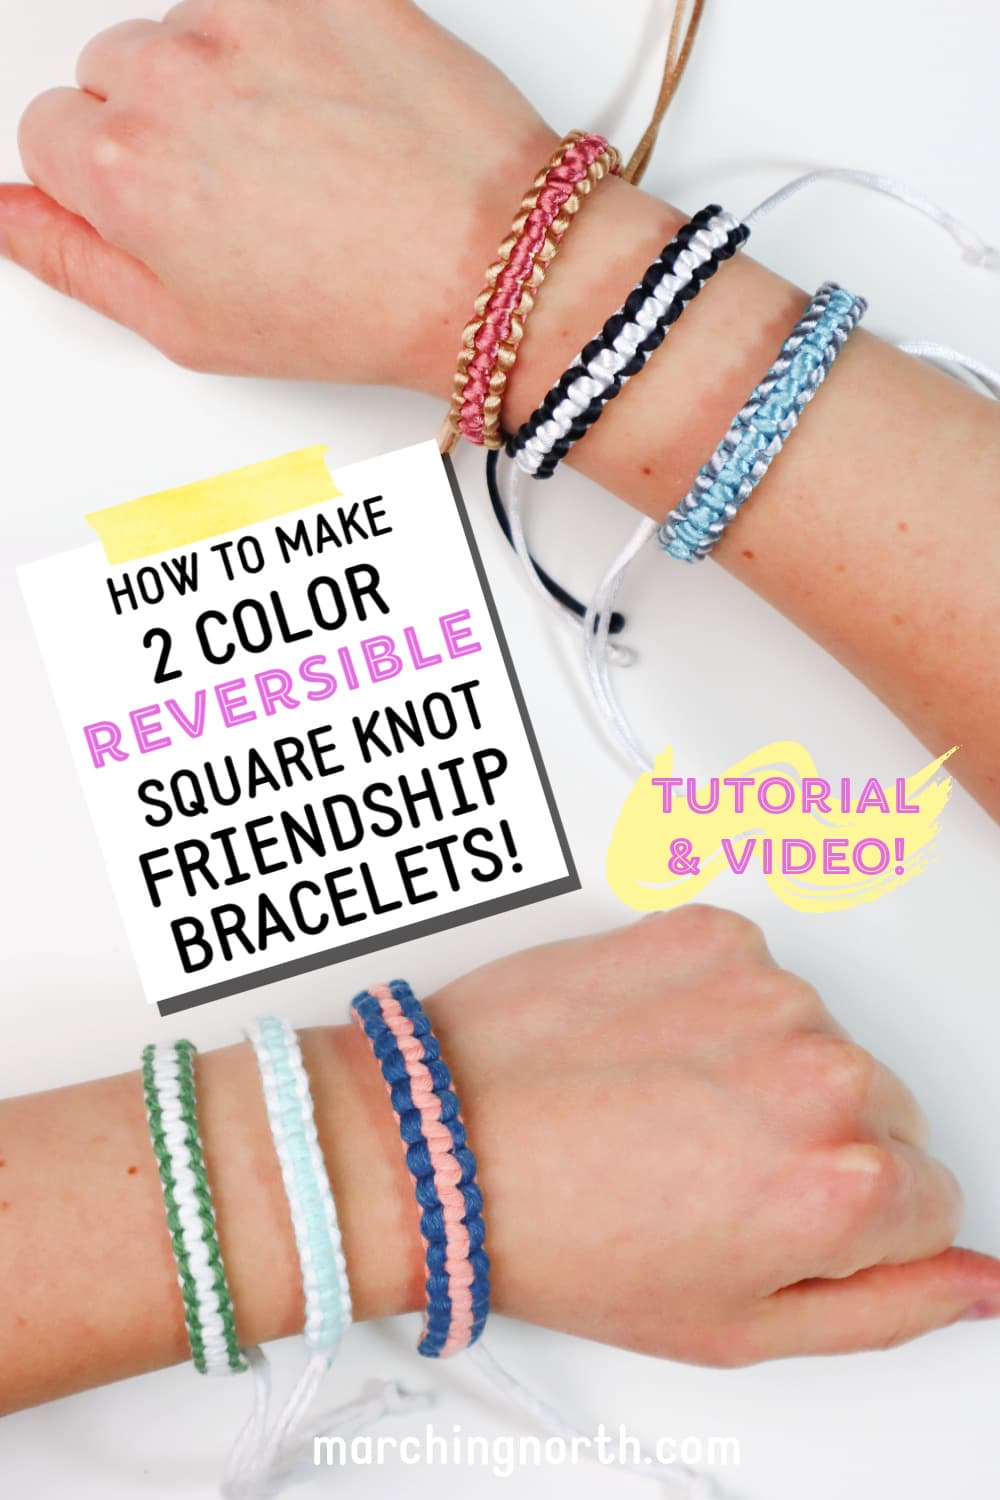 How to Make a 2 Color Macrame Square Knot Bracelet (Reversible!)